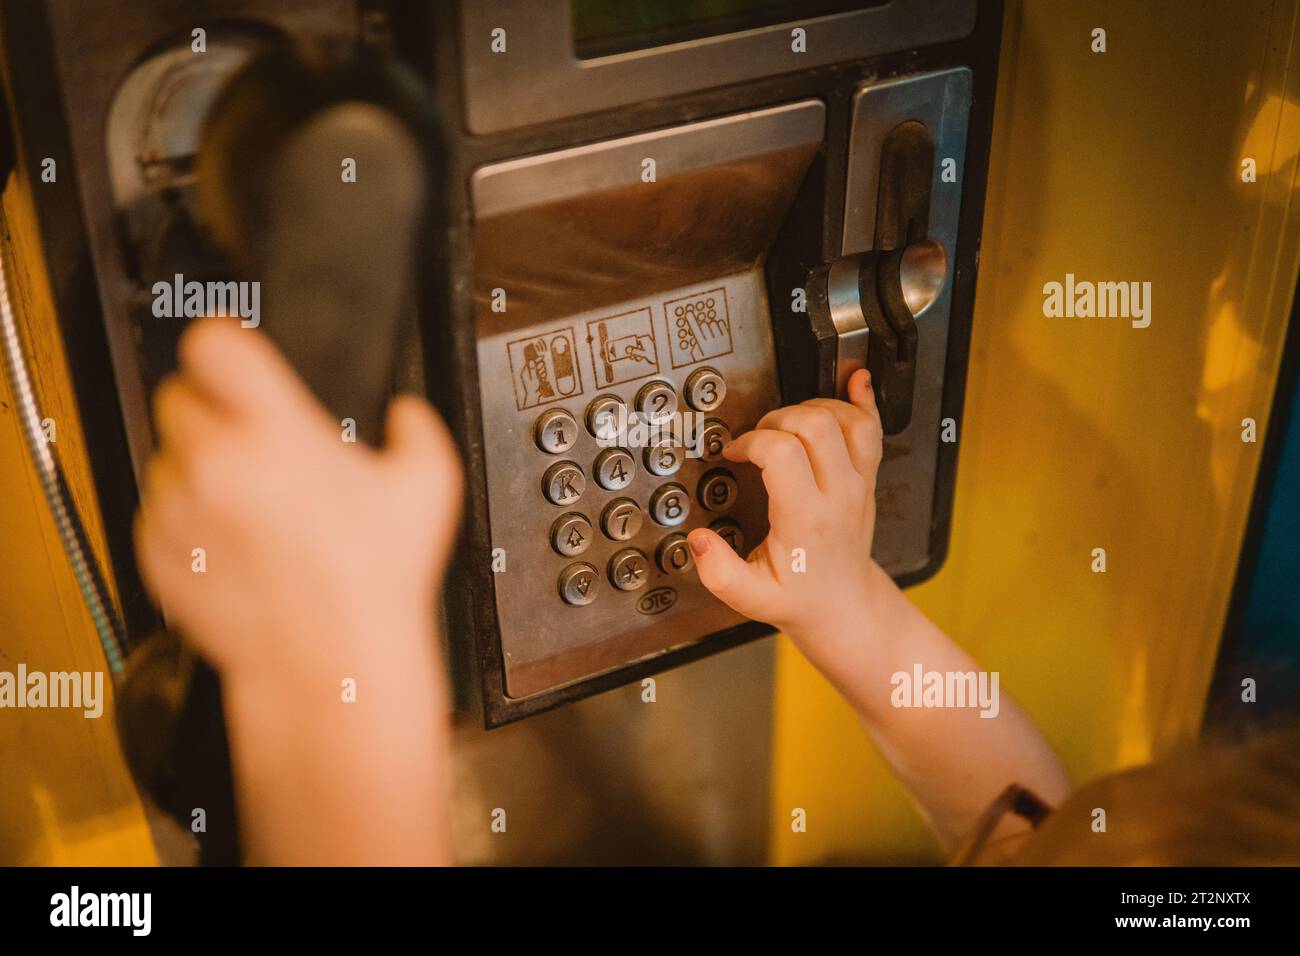 Little girl typing numbers on phone booth Stock Photo